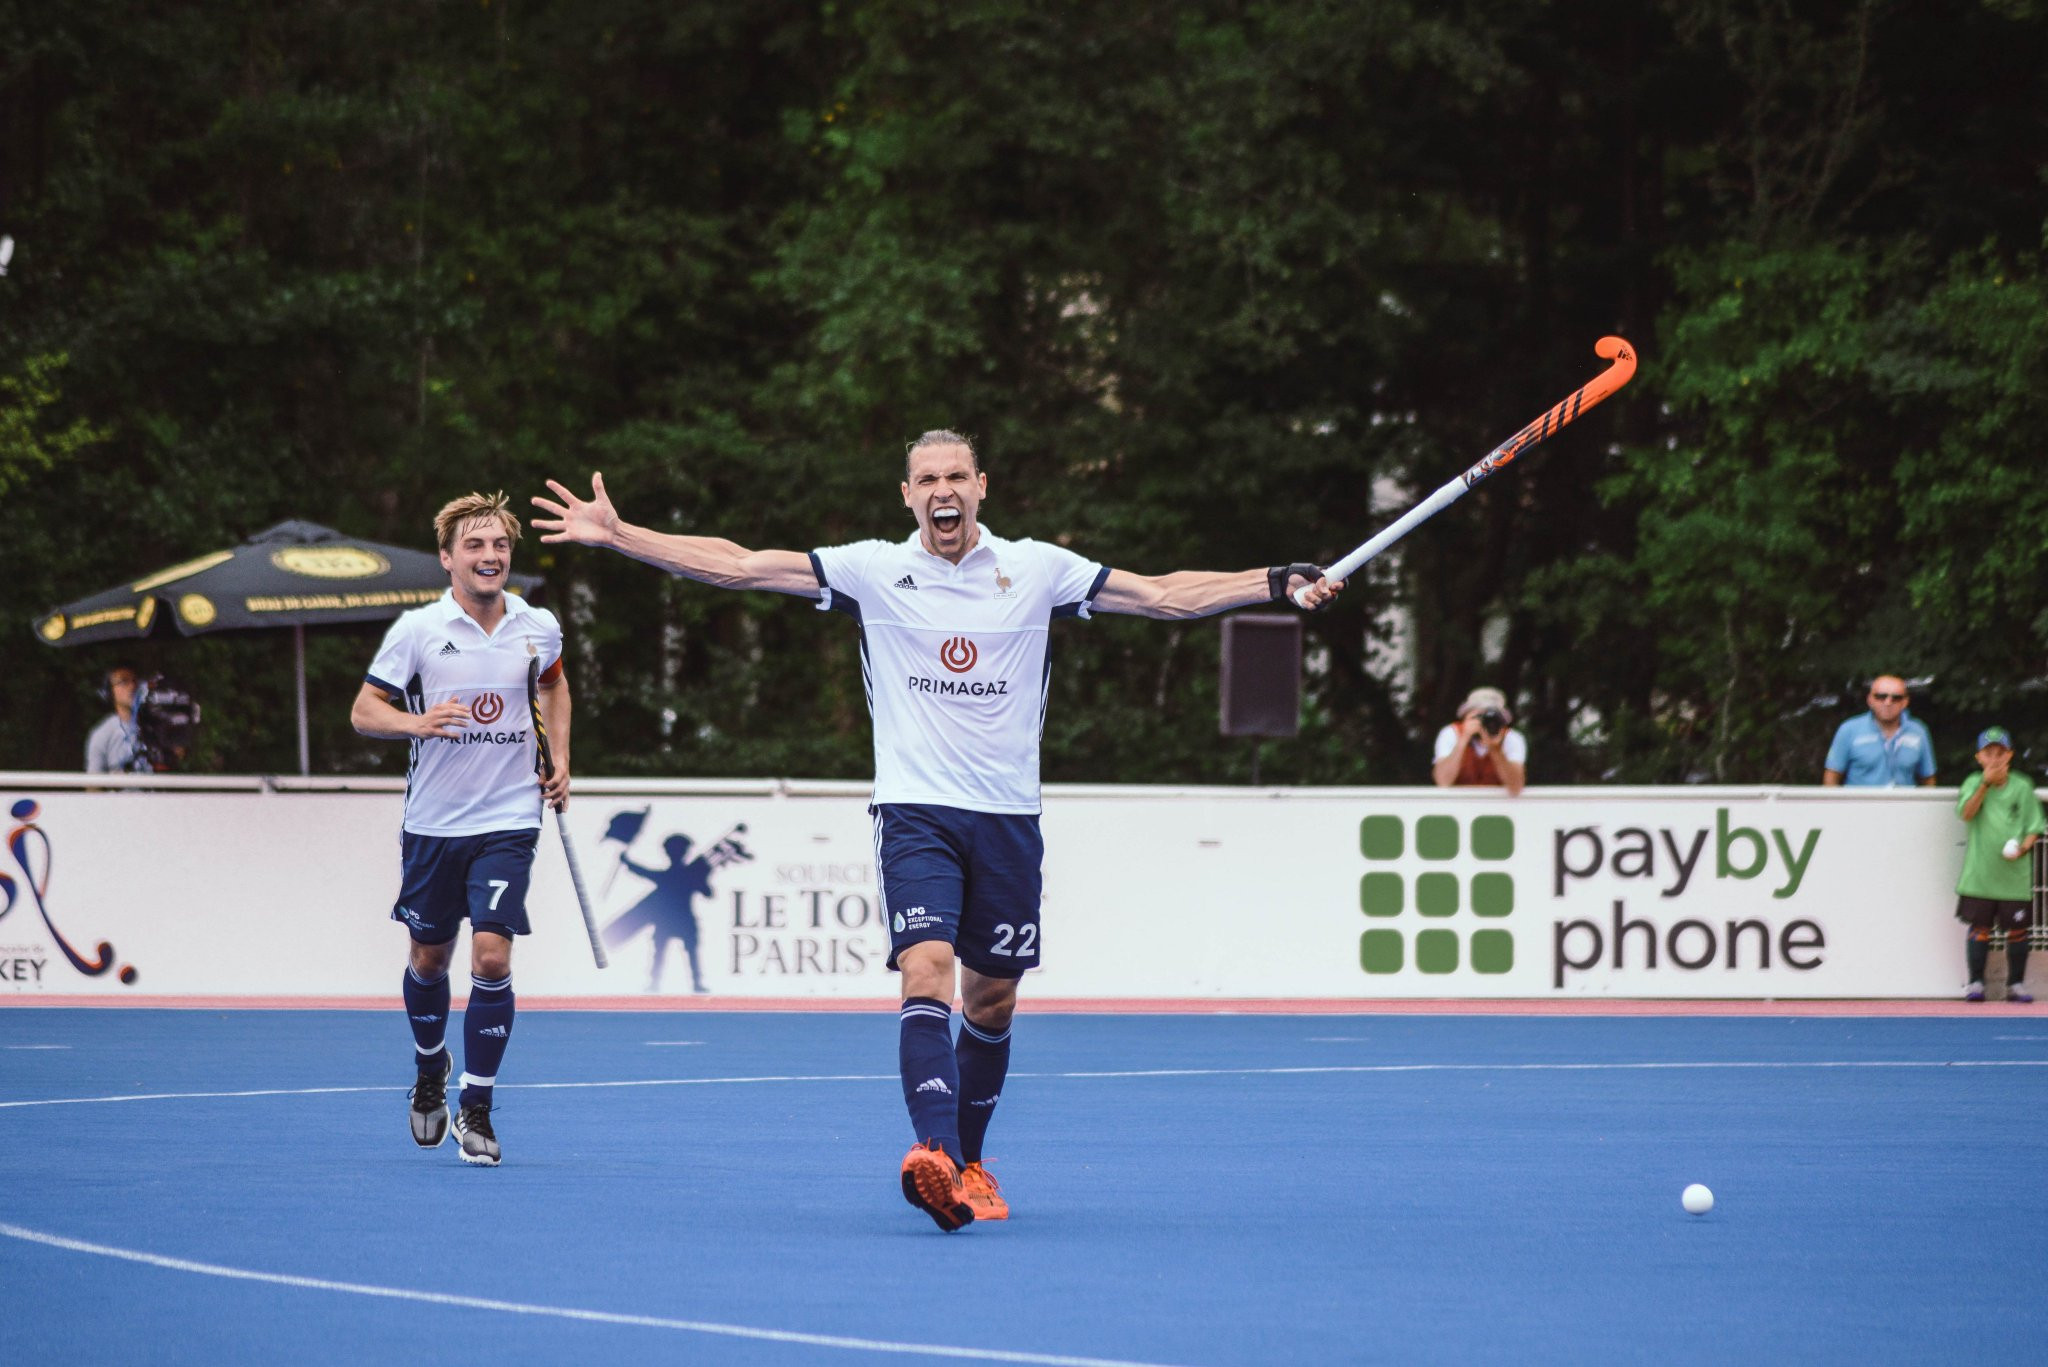 France have won the leg of the FIH men's Series Finals held on home turf ©FIH